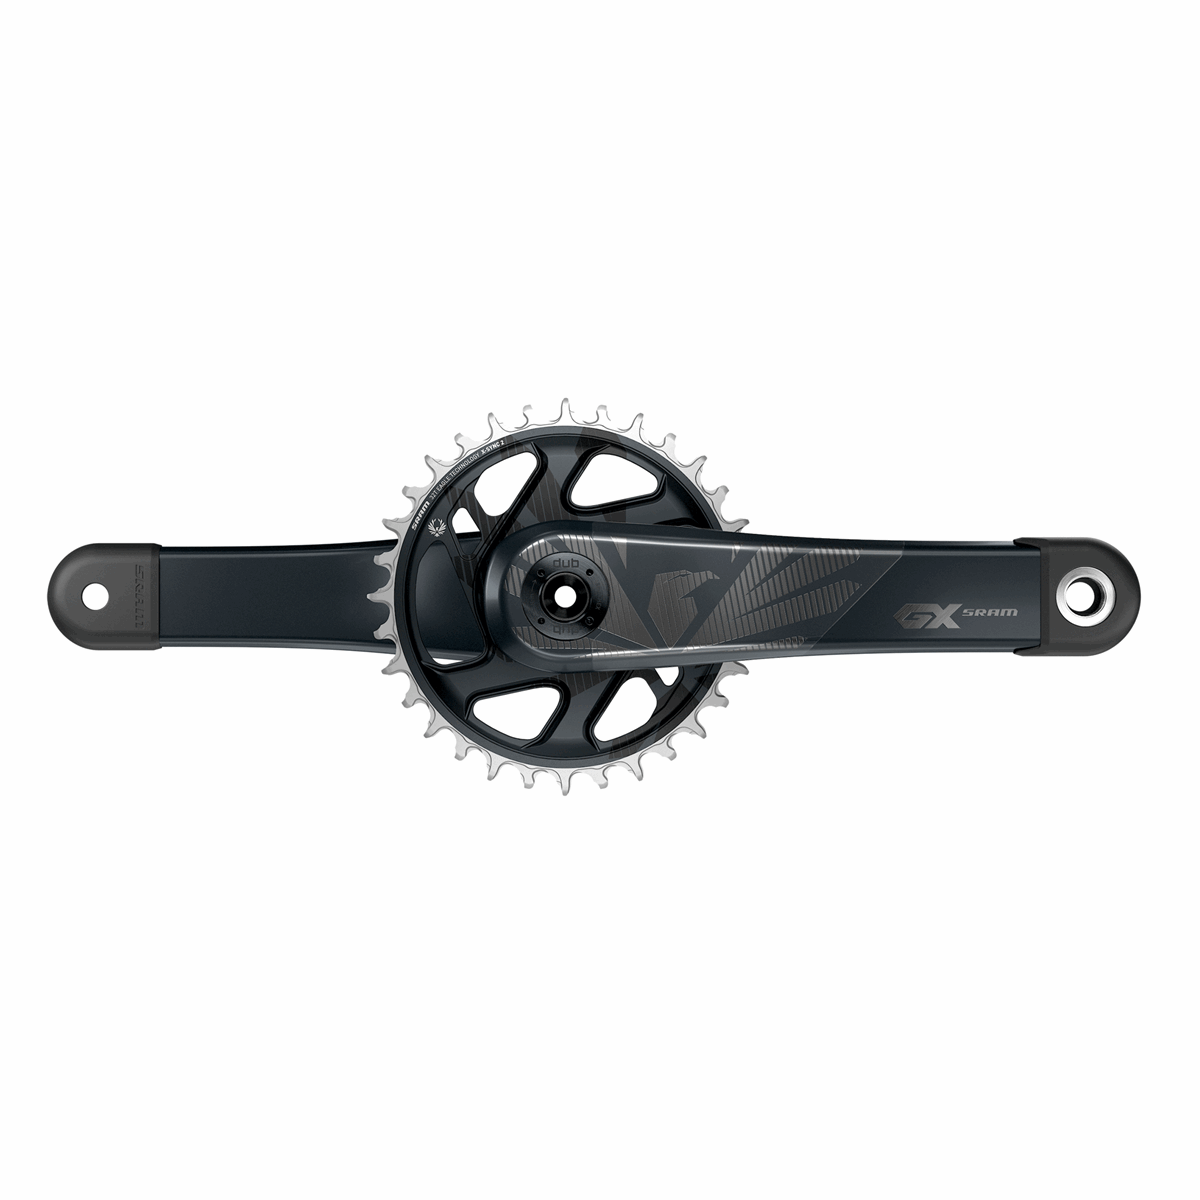 SRAM CRANK GX CARBON EAGLE BOOST 148 DUB 12S W DIRECT MOUNT 32T X-SYNC 2 CHAINRING (DUB CUPS/BEARINGS NOT INCLUDED)